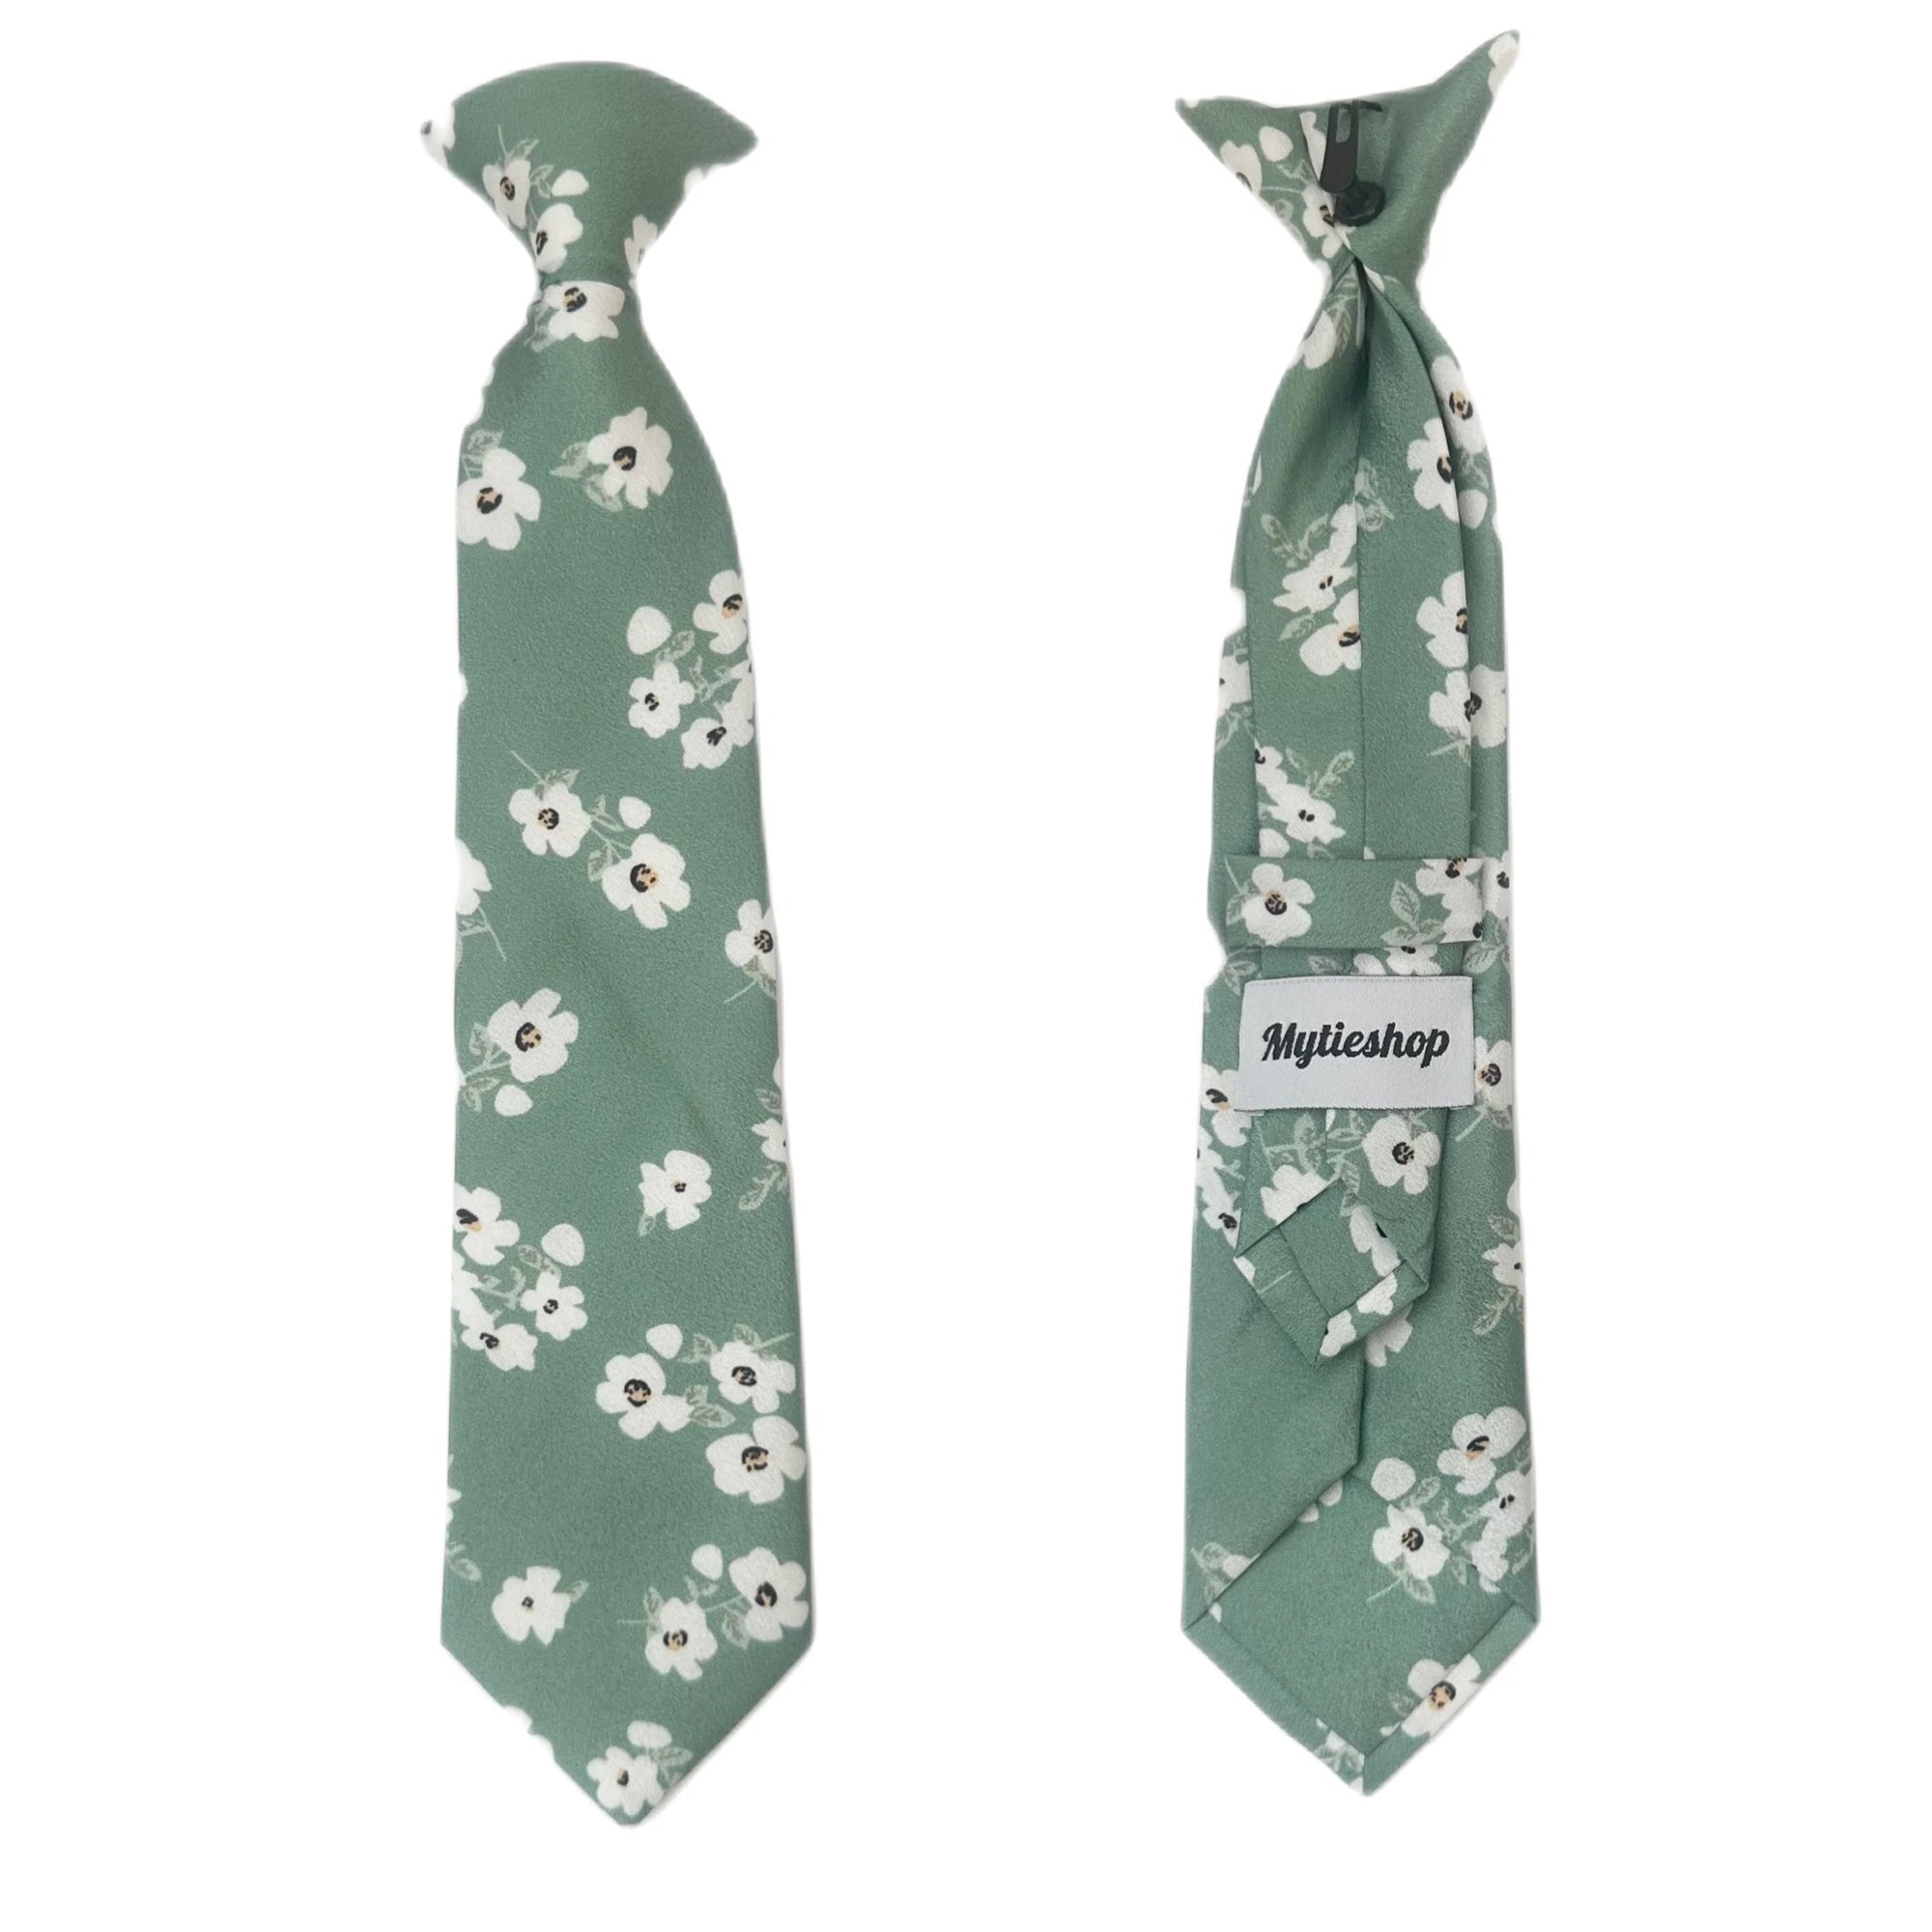 Green Floral Tie for kids Material:Cotton Blend Approx Size: Max width: 6.5 cm / 2.4 inches 9-24 months 26 CM 2-5 years 31 CM 9-11 Years 43 CM Color: Green Great for: Prom Dinners Interviews Photo shoots Photo sessions Dates Engagement pictures Western weddings Floral Cotton necktie for babies and kids for weddings and events. 